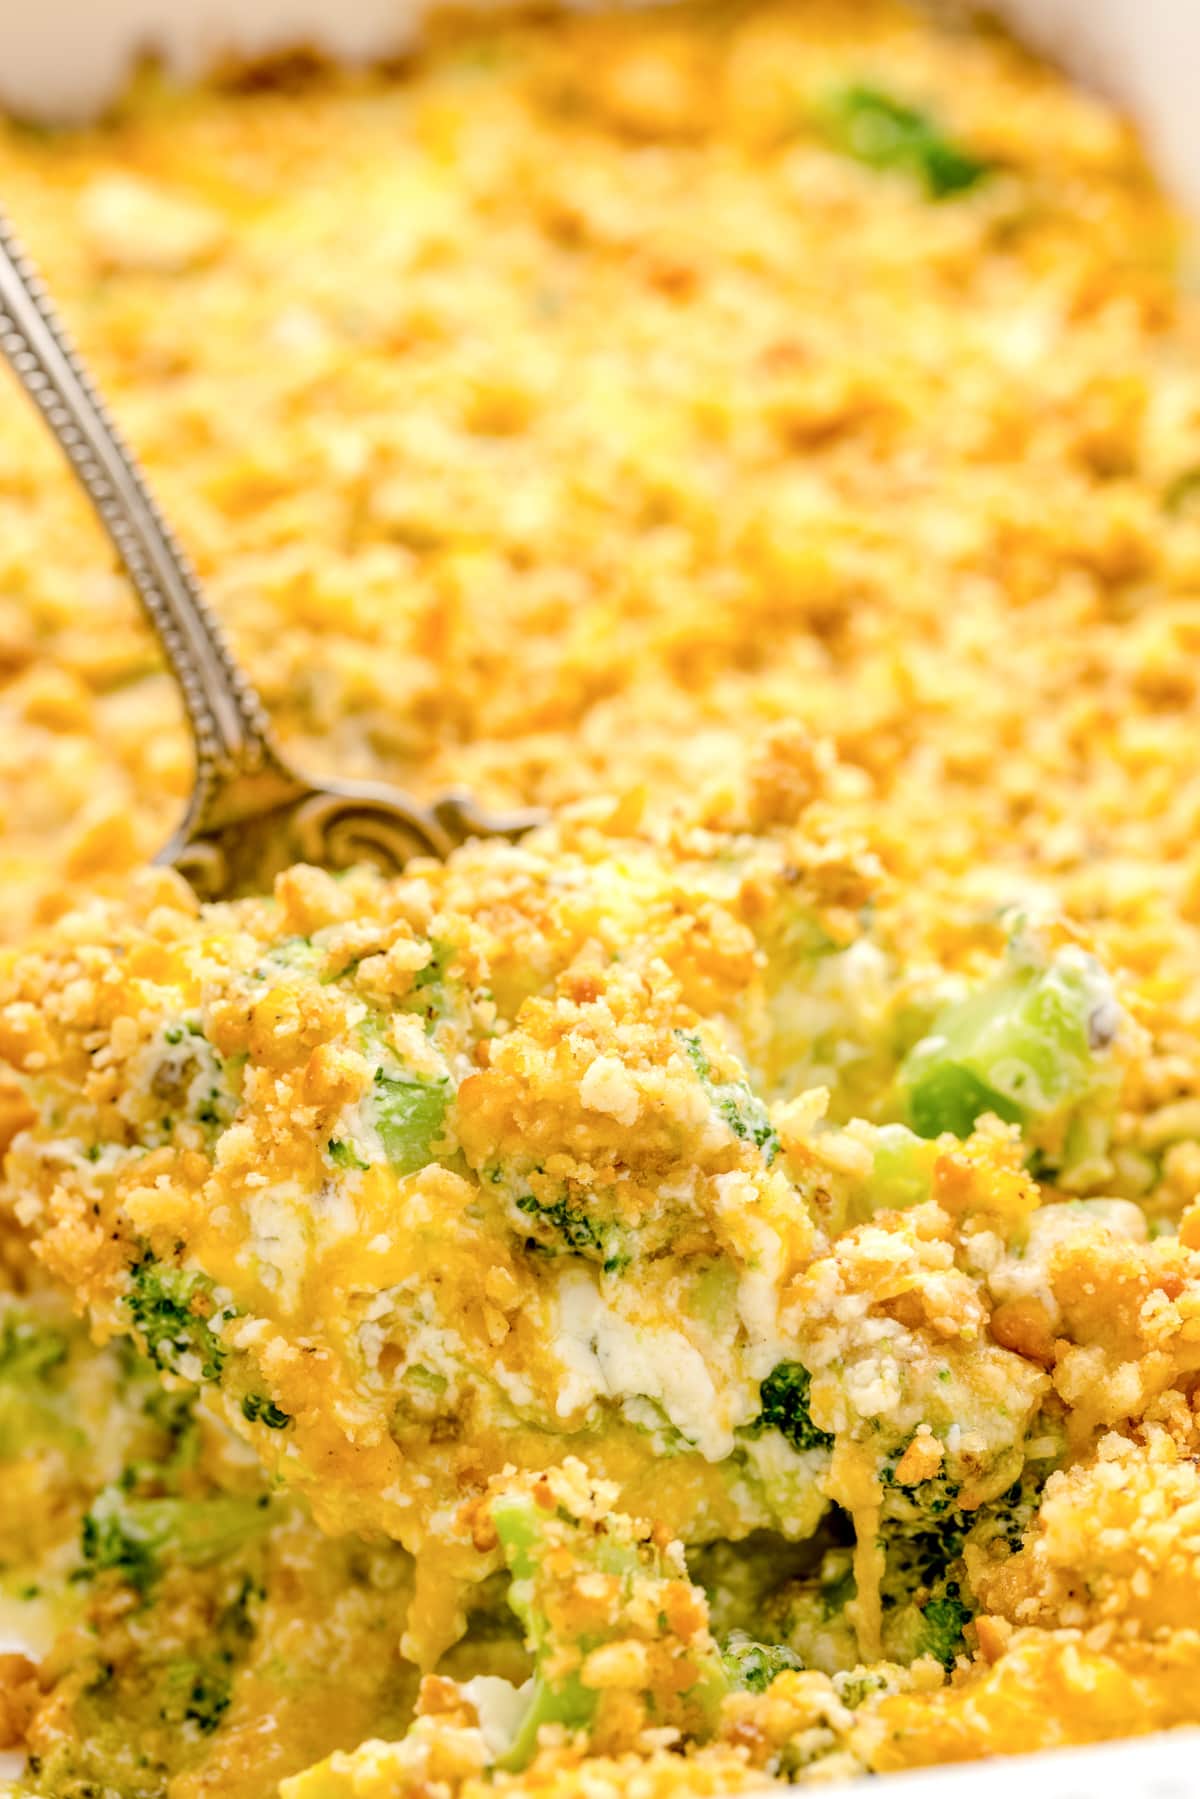 Close up of a scoop of the broccoli cheese casserole.